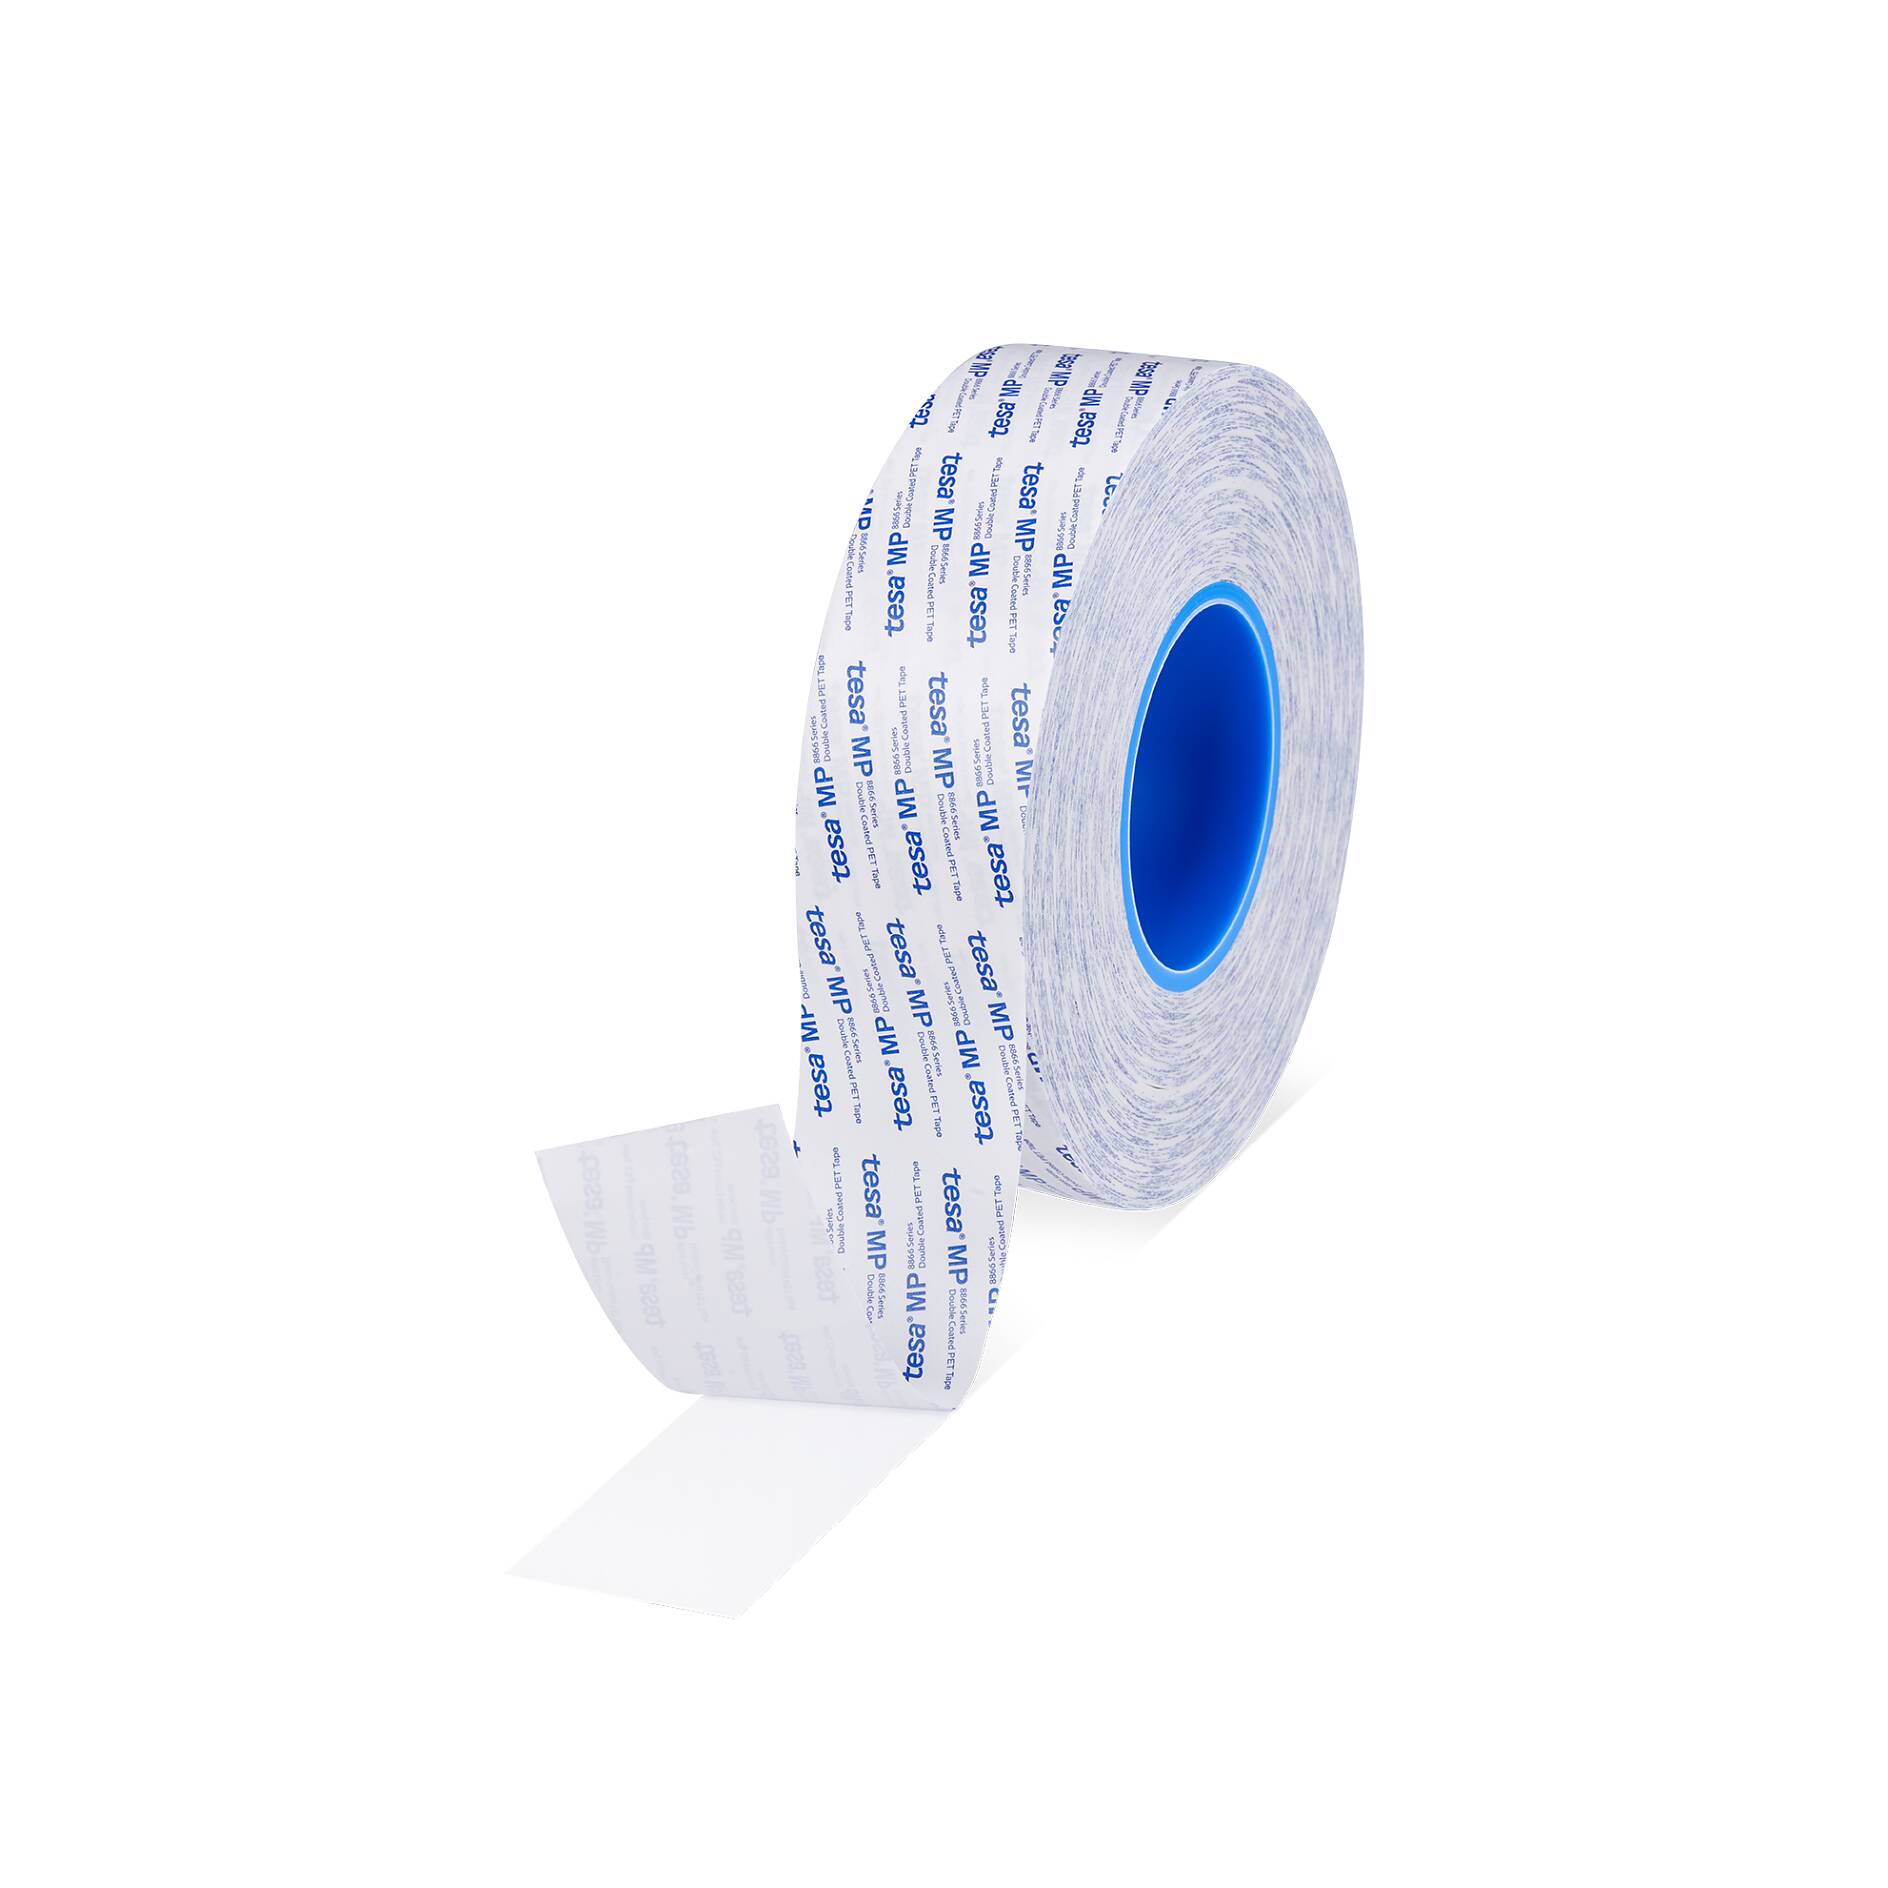 Tesa 4970 Double Sided White PVC Tape 3 x 55M with High Adhesion